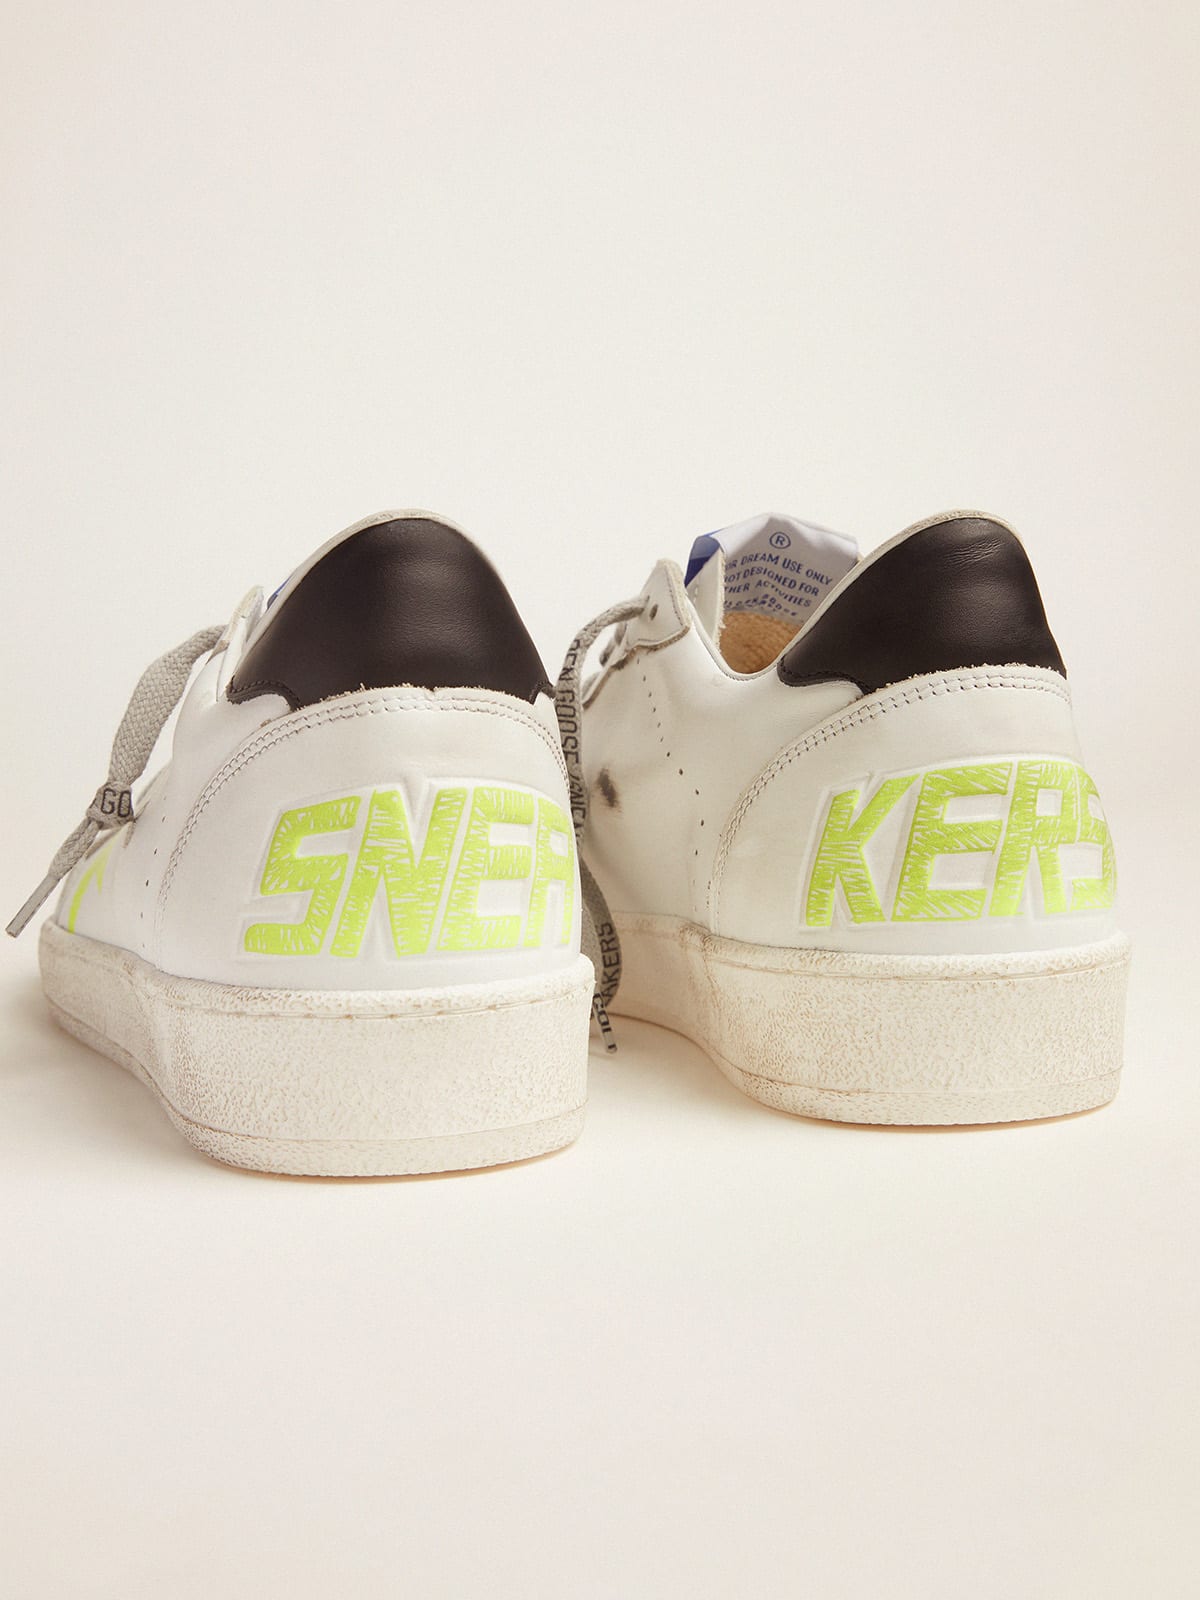 White Ball Star sneakers with fluorescent yellow details | Golden Goose